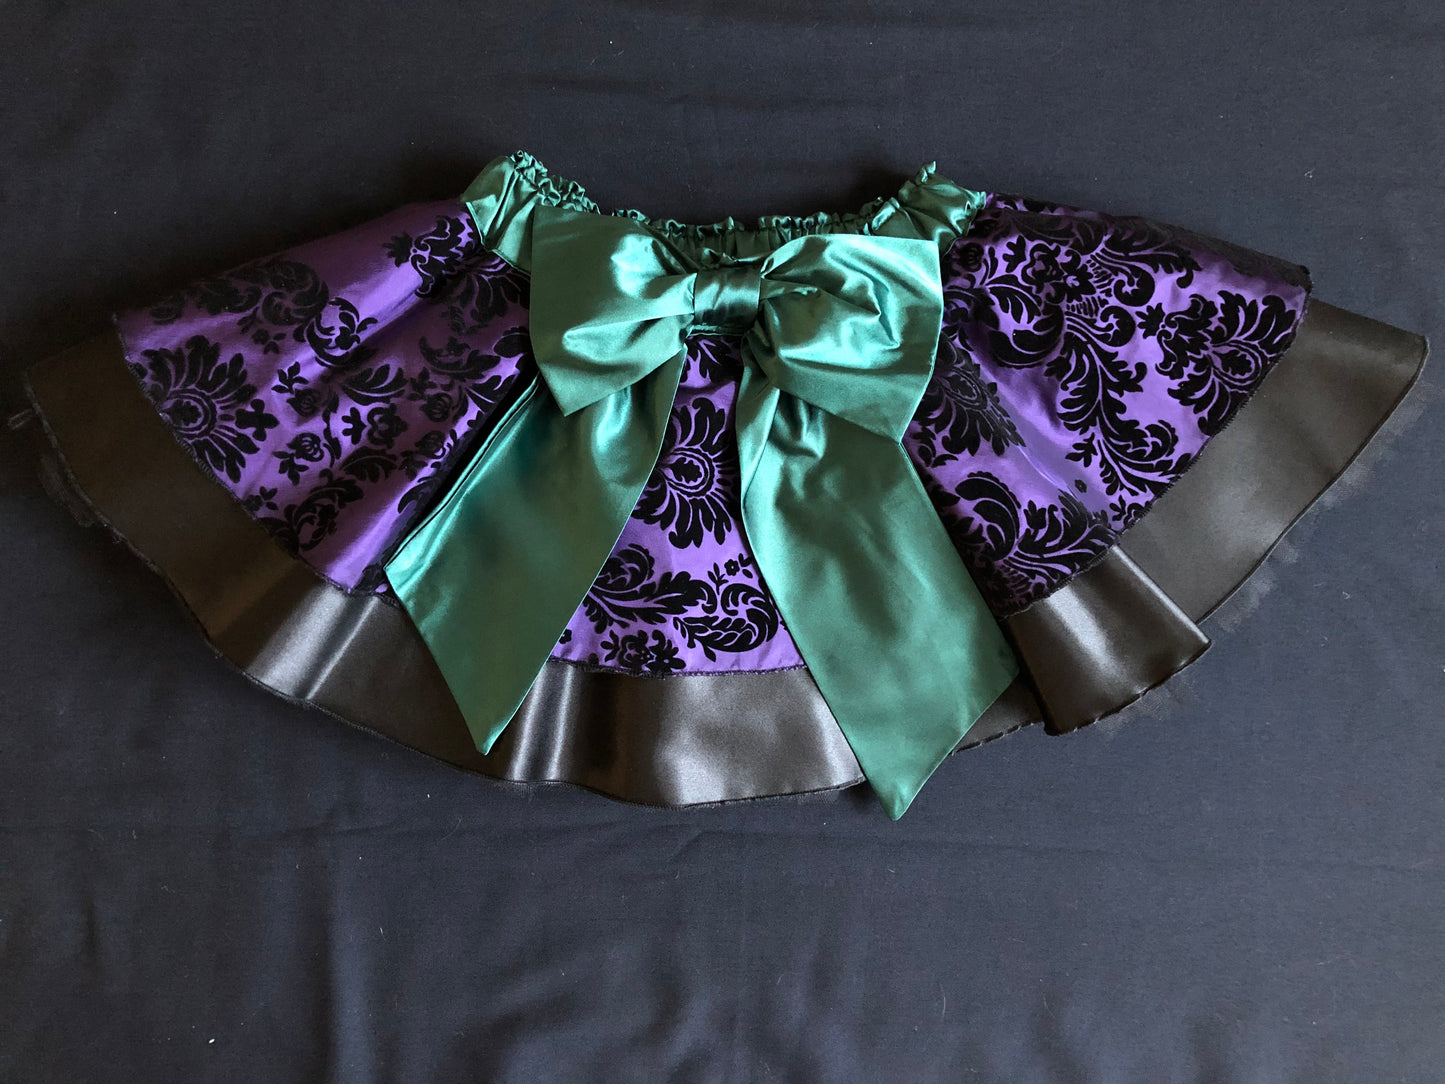 The Leota Running Tutu Skirt Inspired by The Haunted Mansion